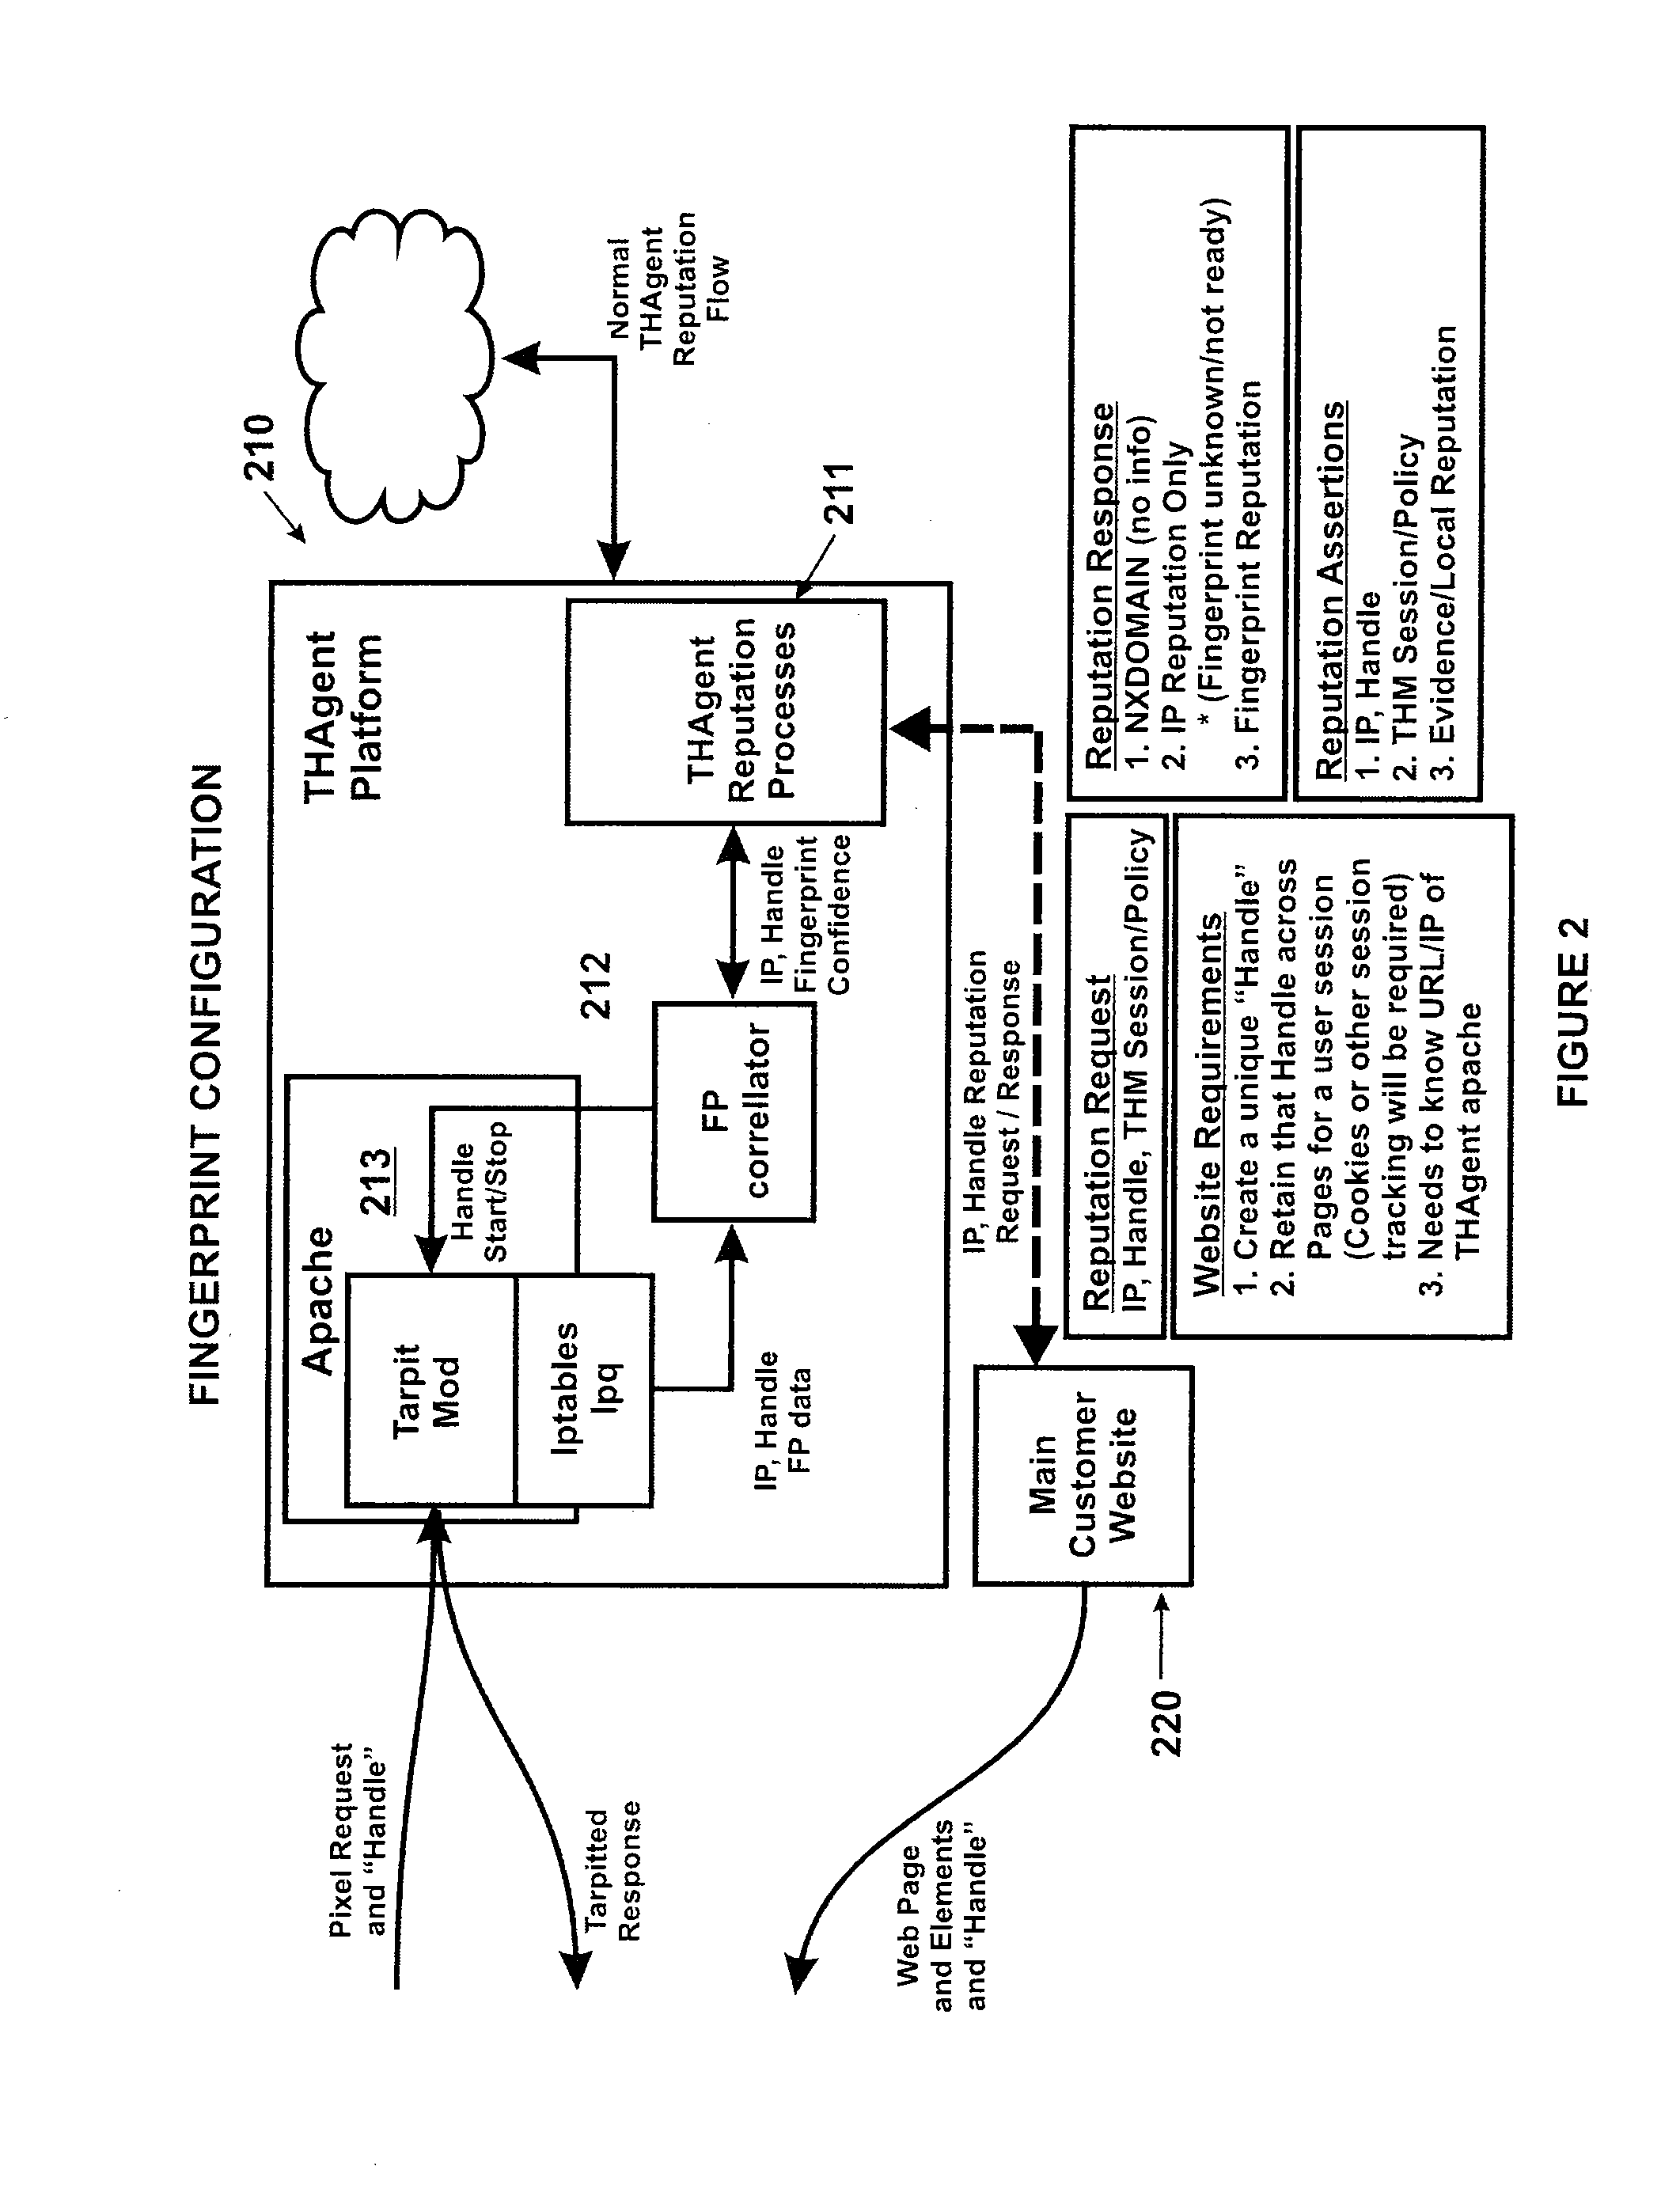 Method for tracking machines on a network using multivariable fingerprinting of passively available information